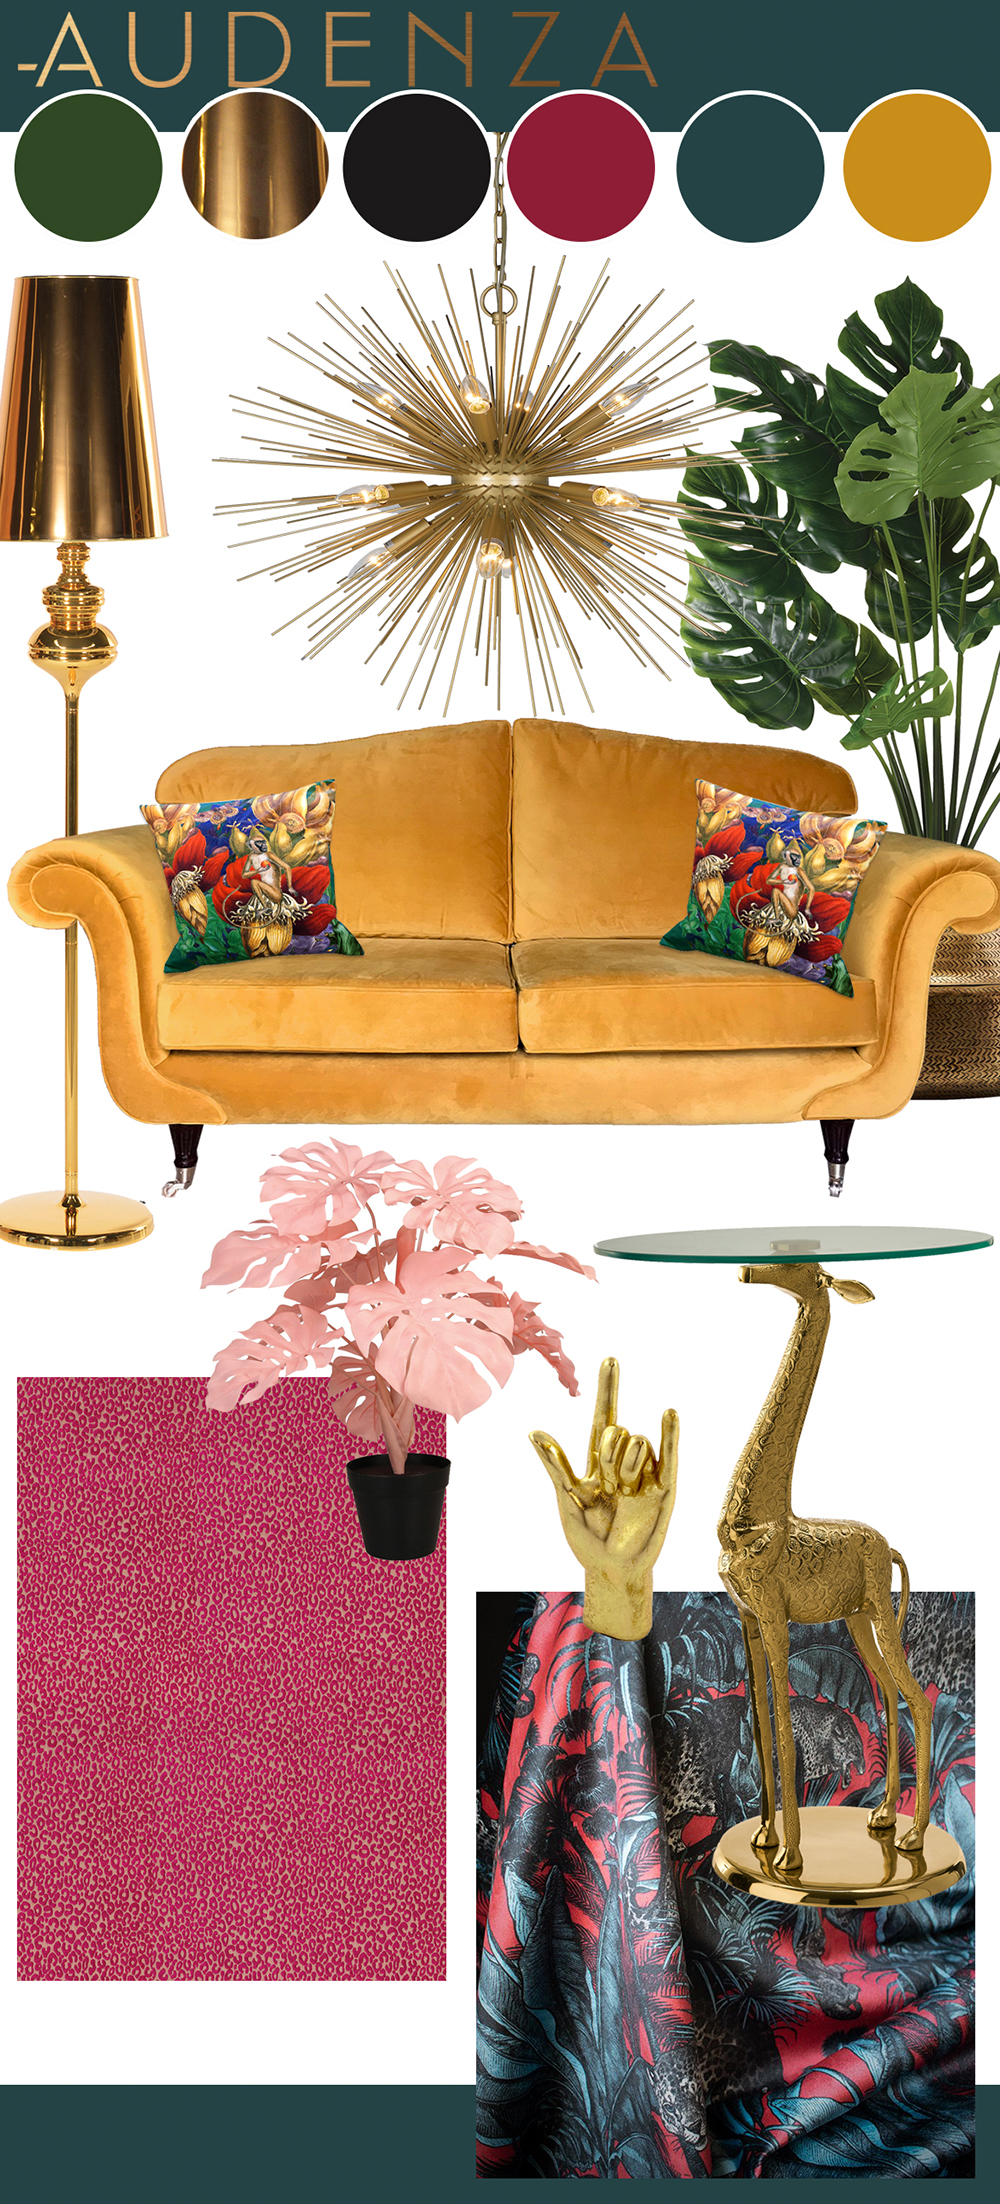 Maximalist living room inspiration in a hot pink, teal and mustard colour palette. With Serpentine paint by Zoffany, Cheetah fabric by Osborne & Little, and Faunacation fabric by Divine Savages, furniture and accessories by Audenza.